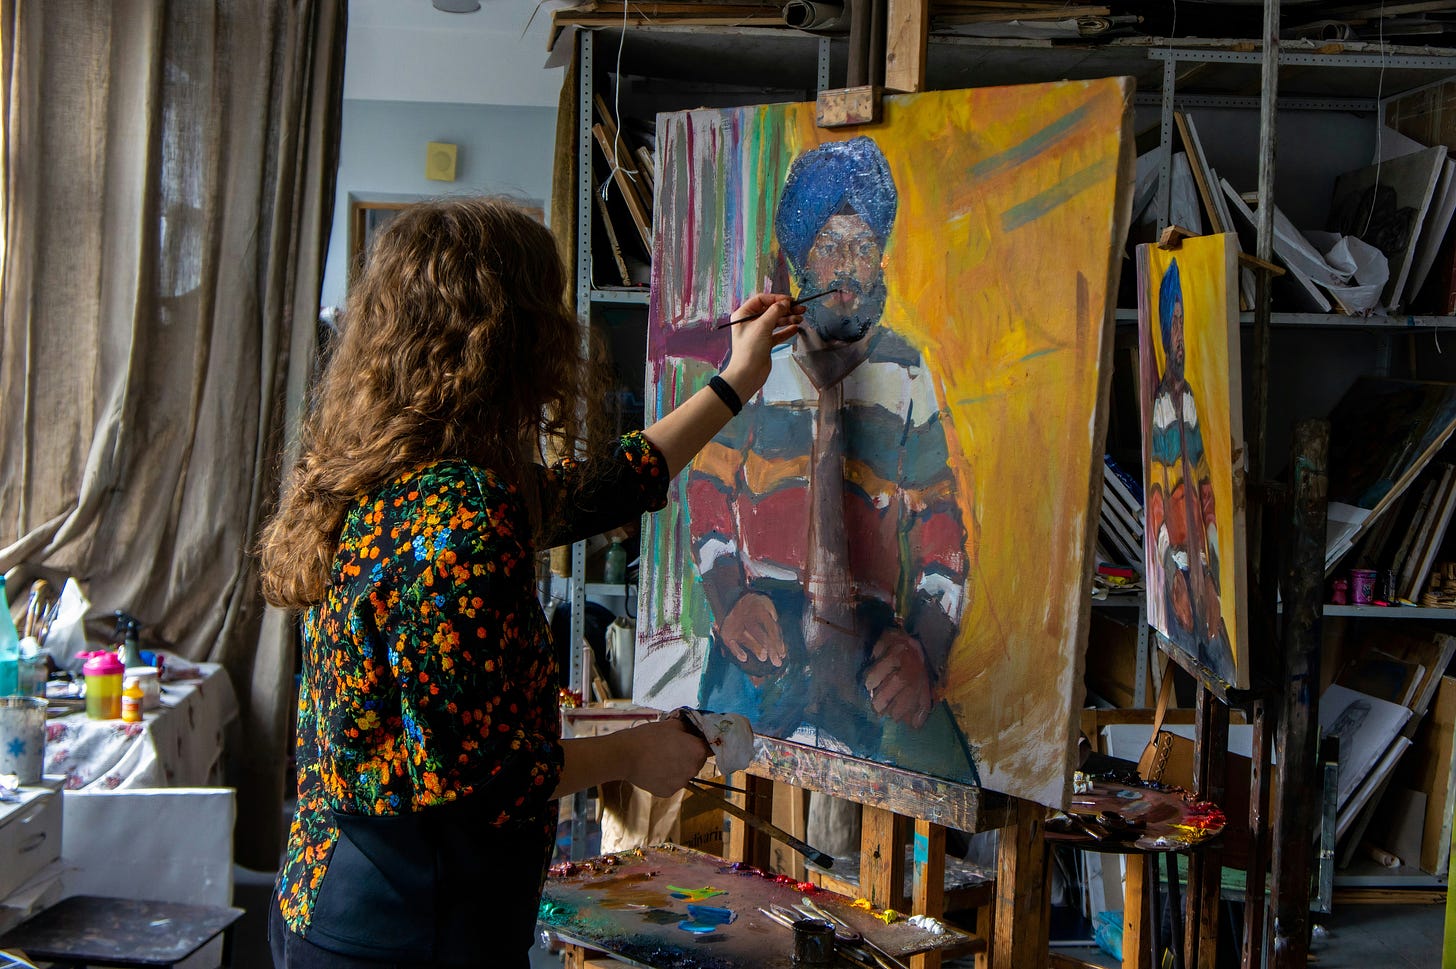 A woman with curly brunette hair paints a picture of a man wearing a blue turbin; white, green, yellow and red shirt, and green paints.